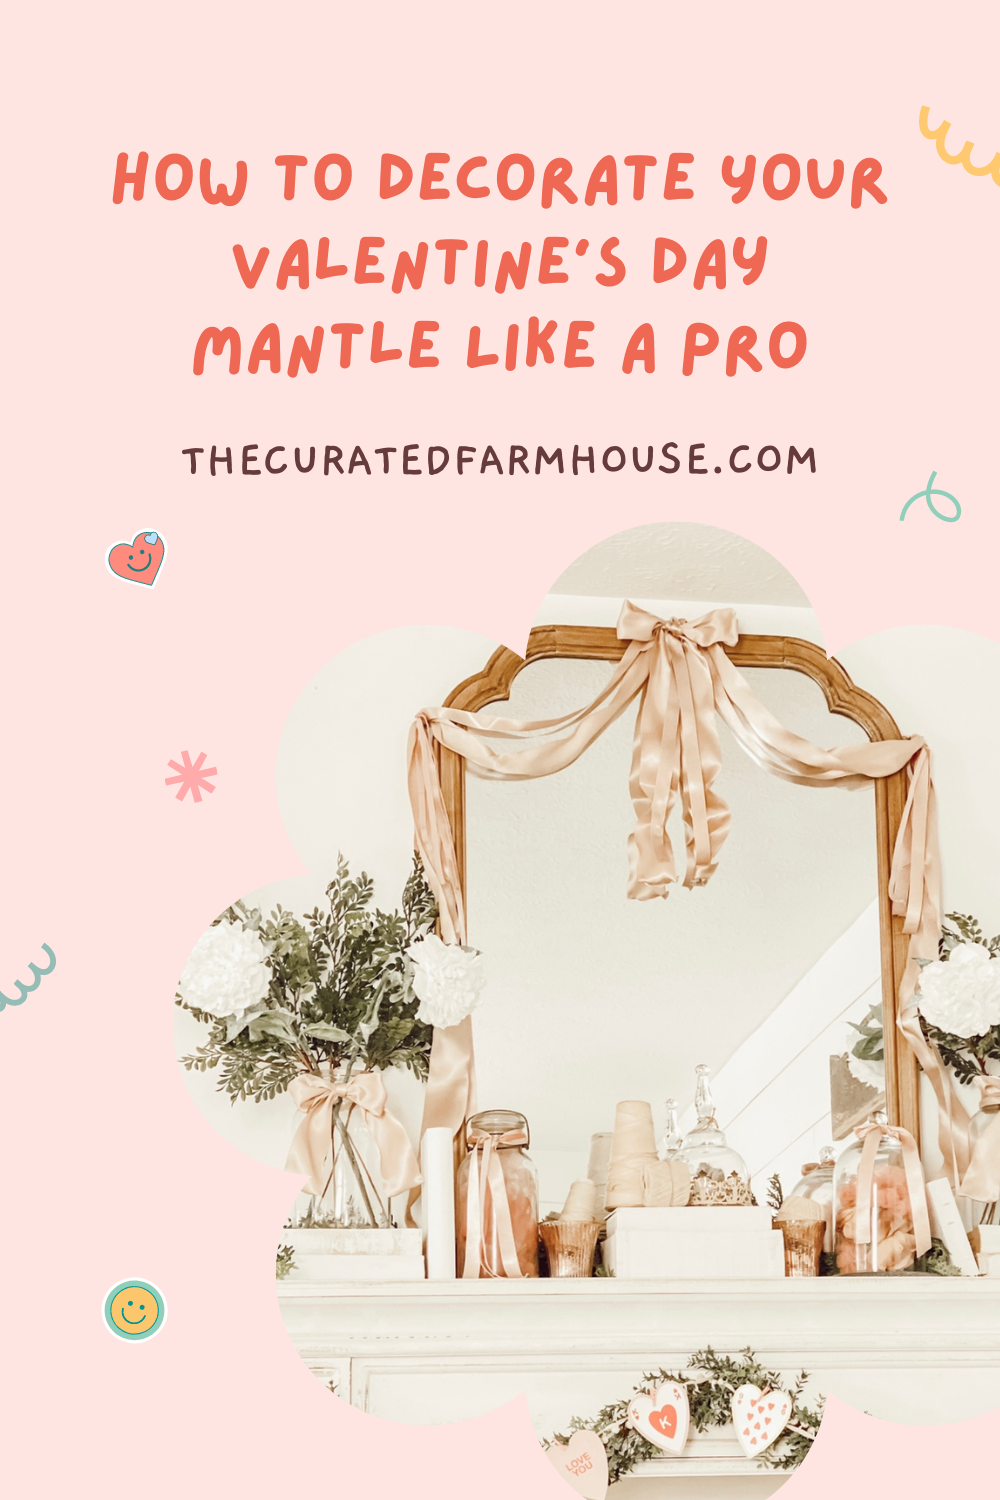 How To Decorate Your Valentine\'s Day Mantle Like a Pro